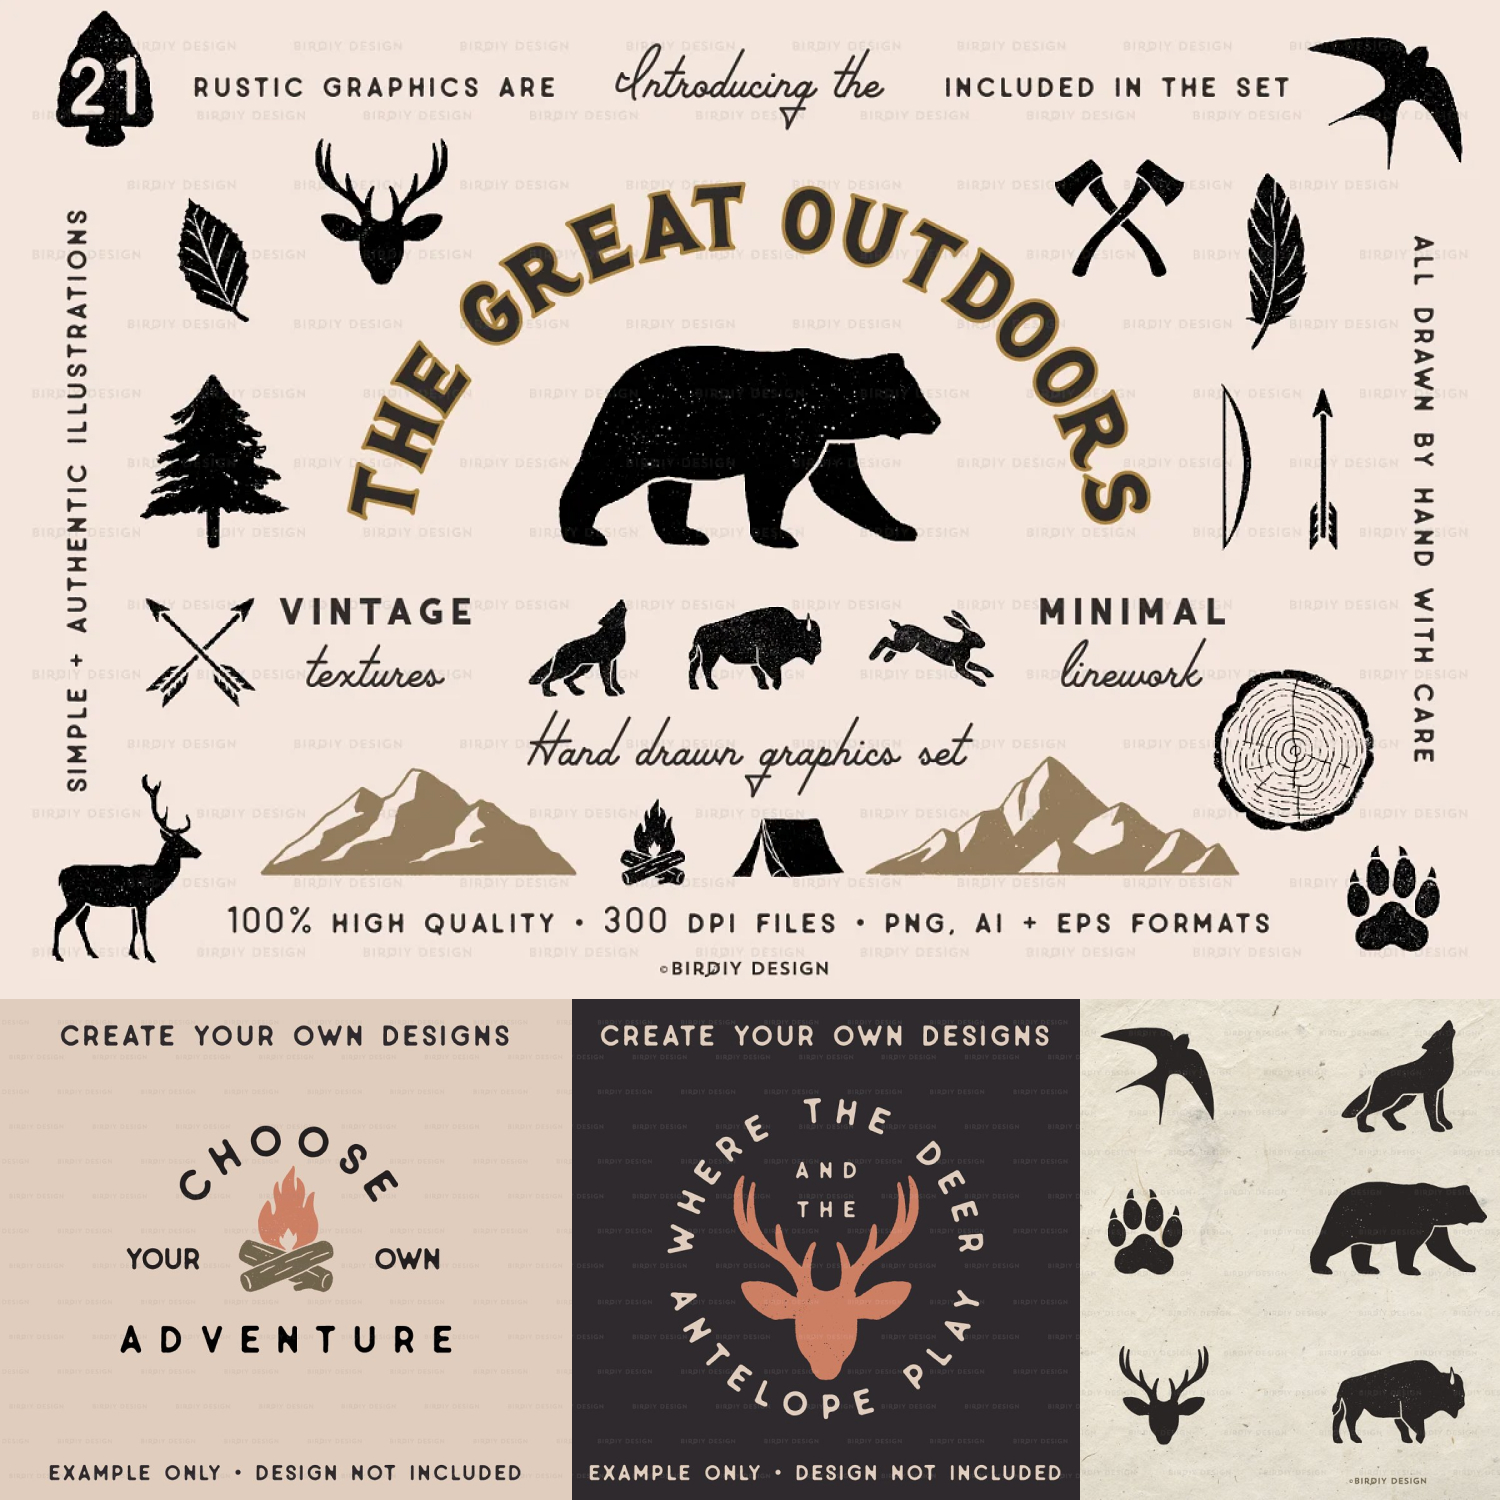 Preview rustic nature icons illustrations.